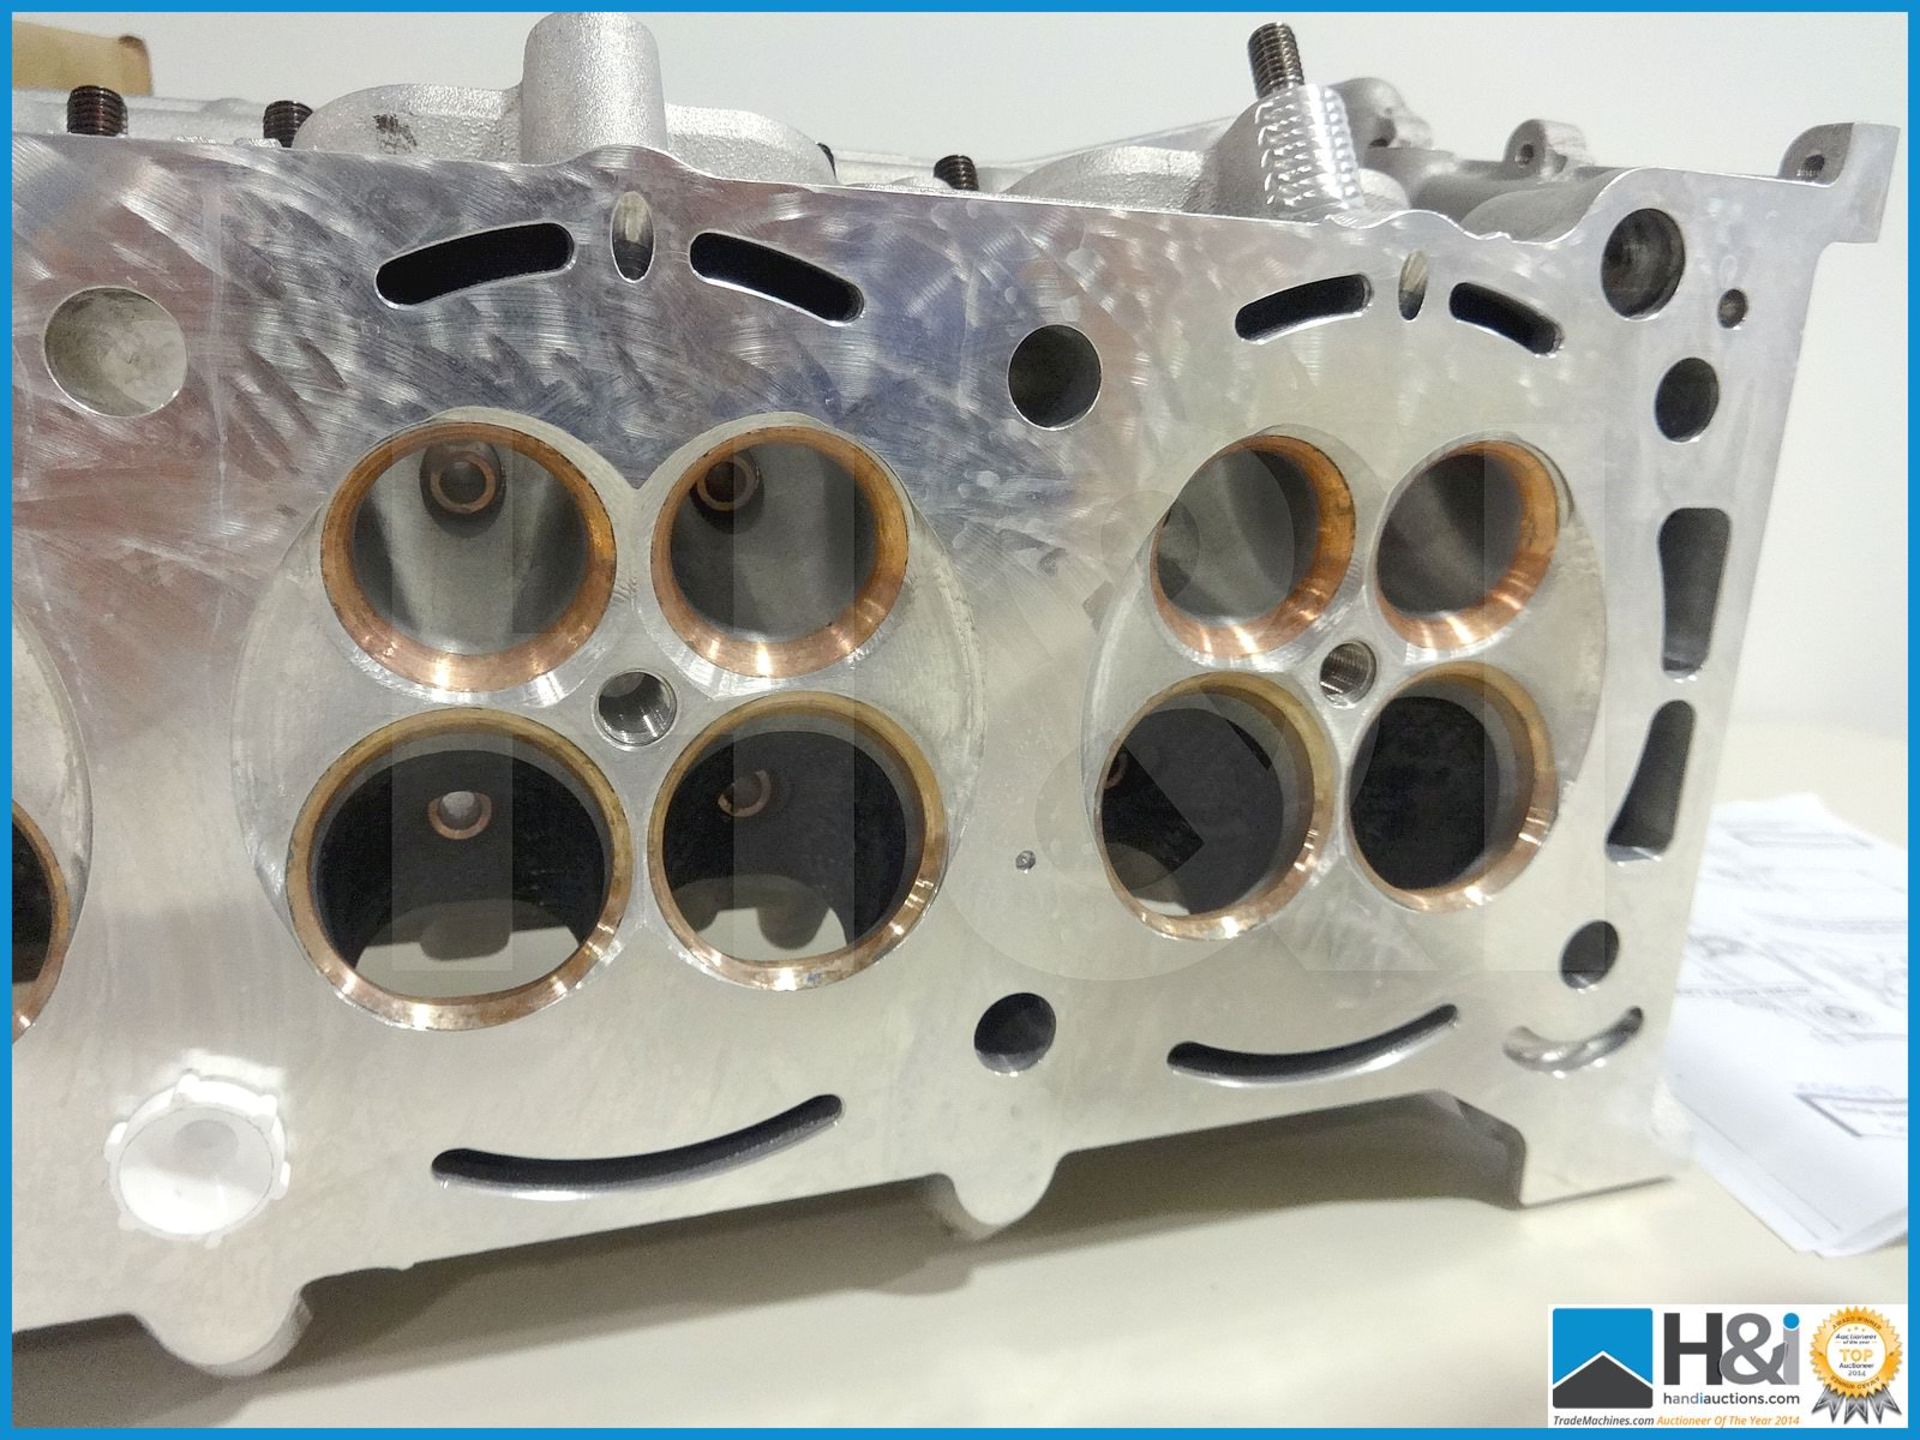 1 off Cosworth XG LH cylinder head assembly - shallow. Valued at over GBP 10,000. MC: XG8639 CILN: 1 - Image 3 of 8